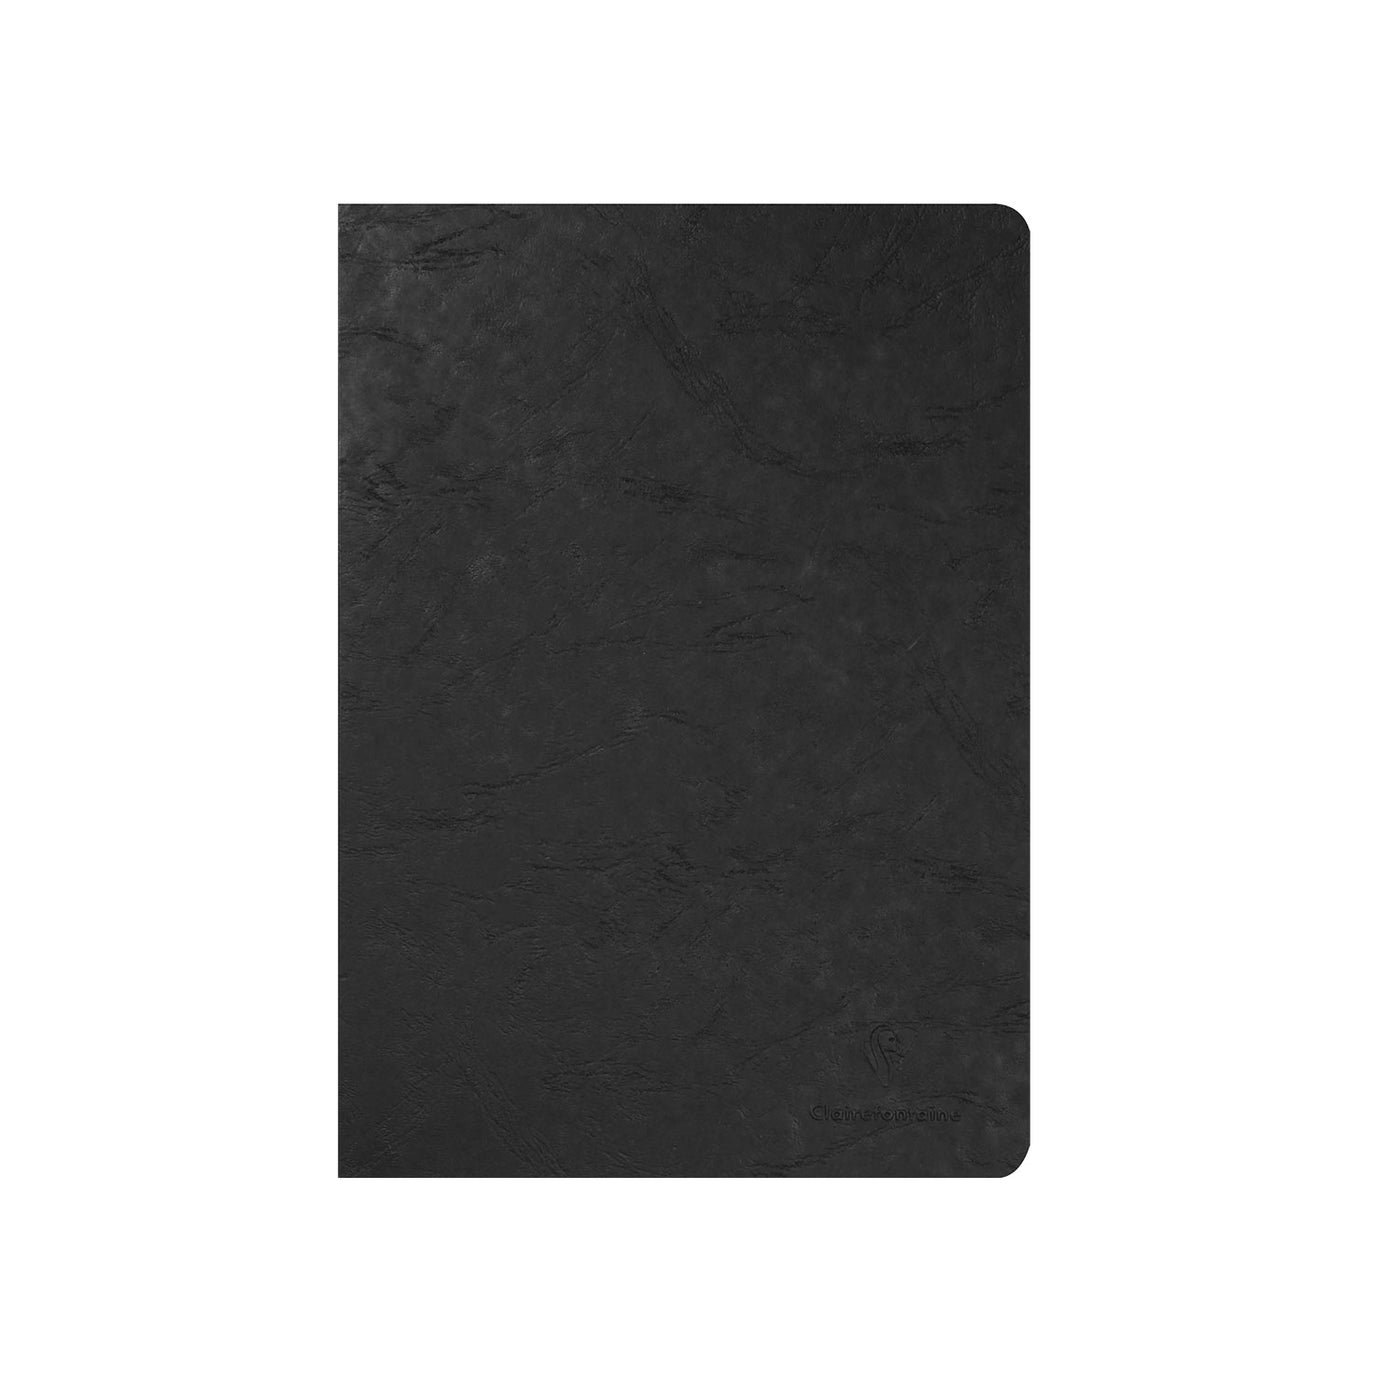 Clairefontaine Age Bag Essentials Black Staplebound Notebook - A4 Ruled 1